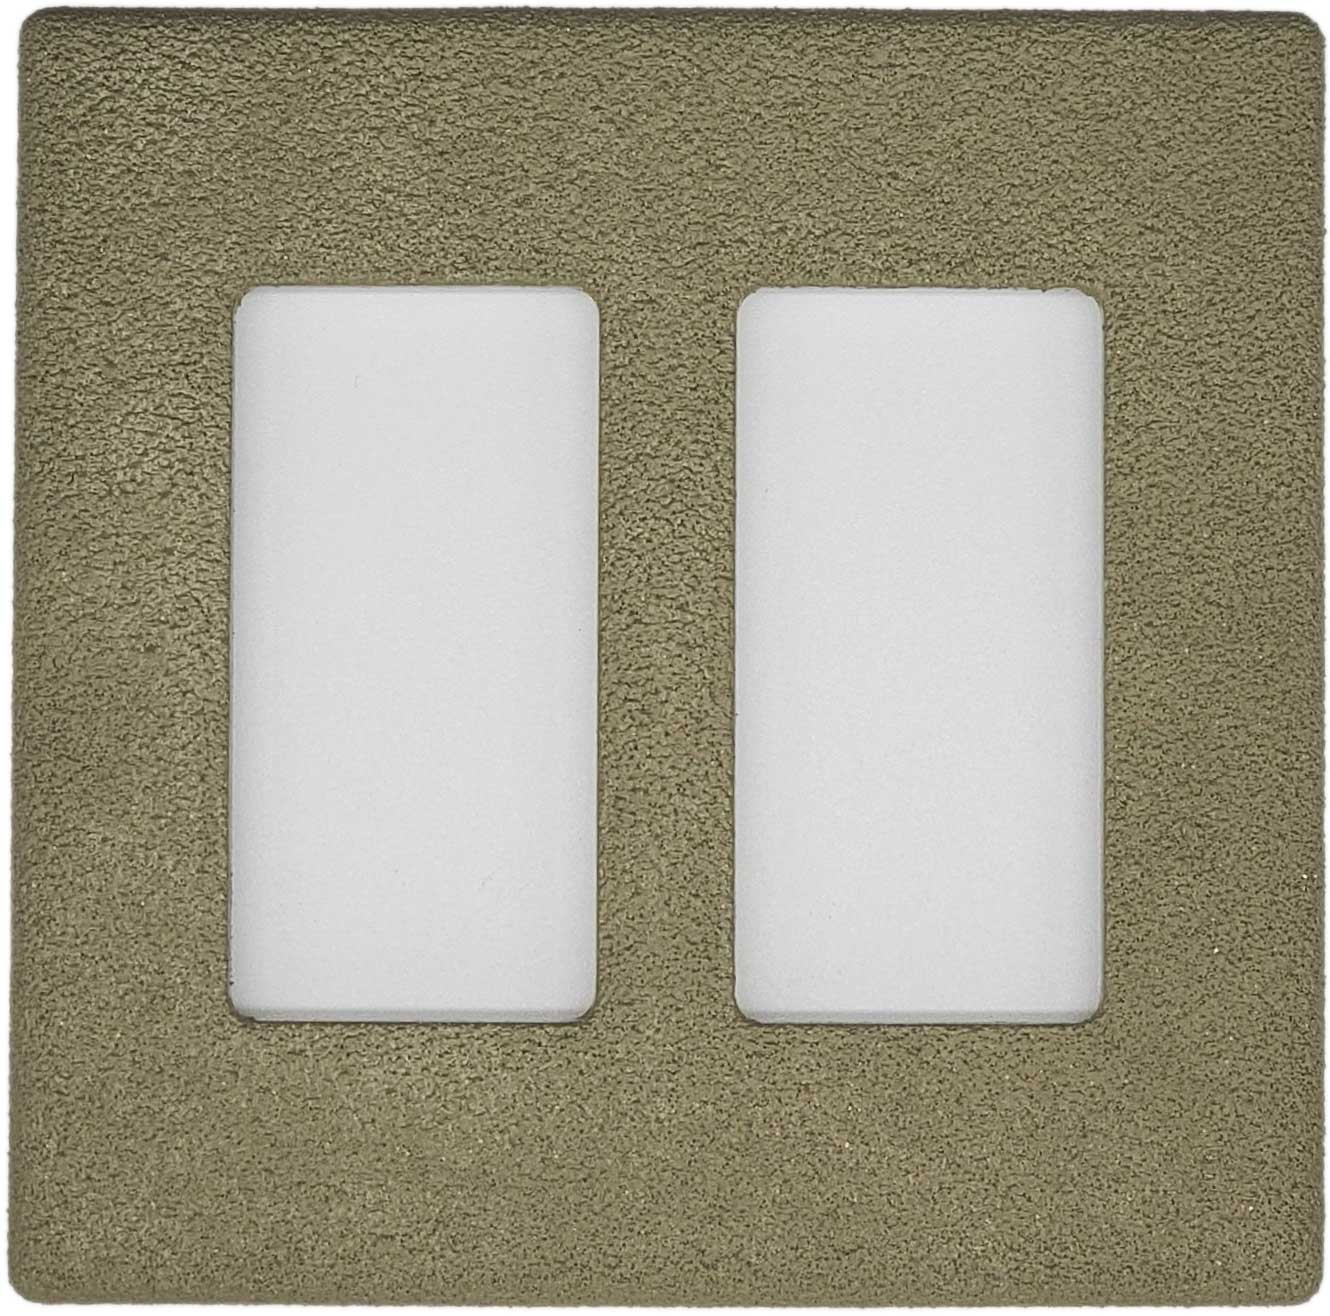 2-Gang Outlet Cover Switch Plate in sage